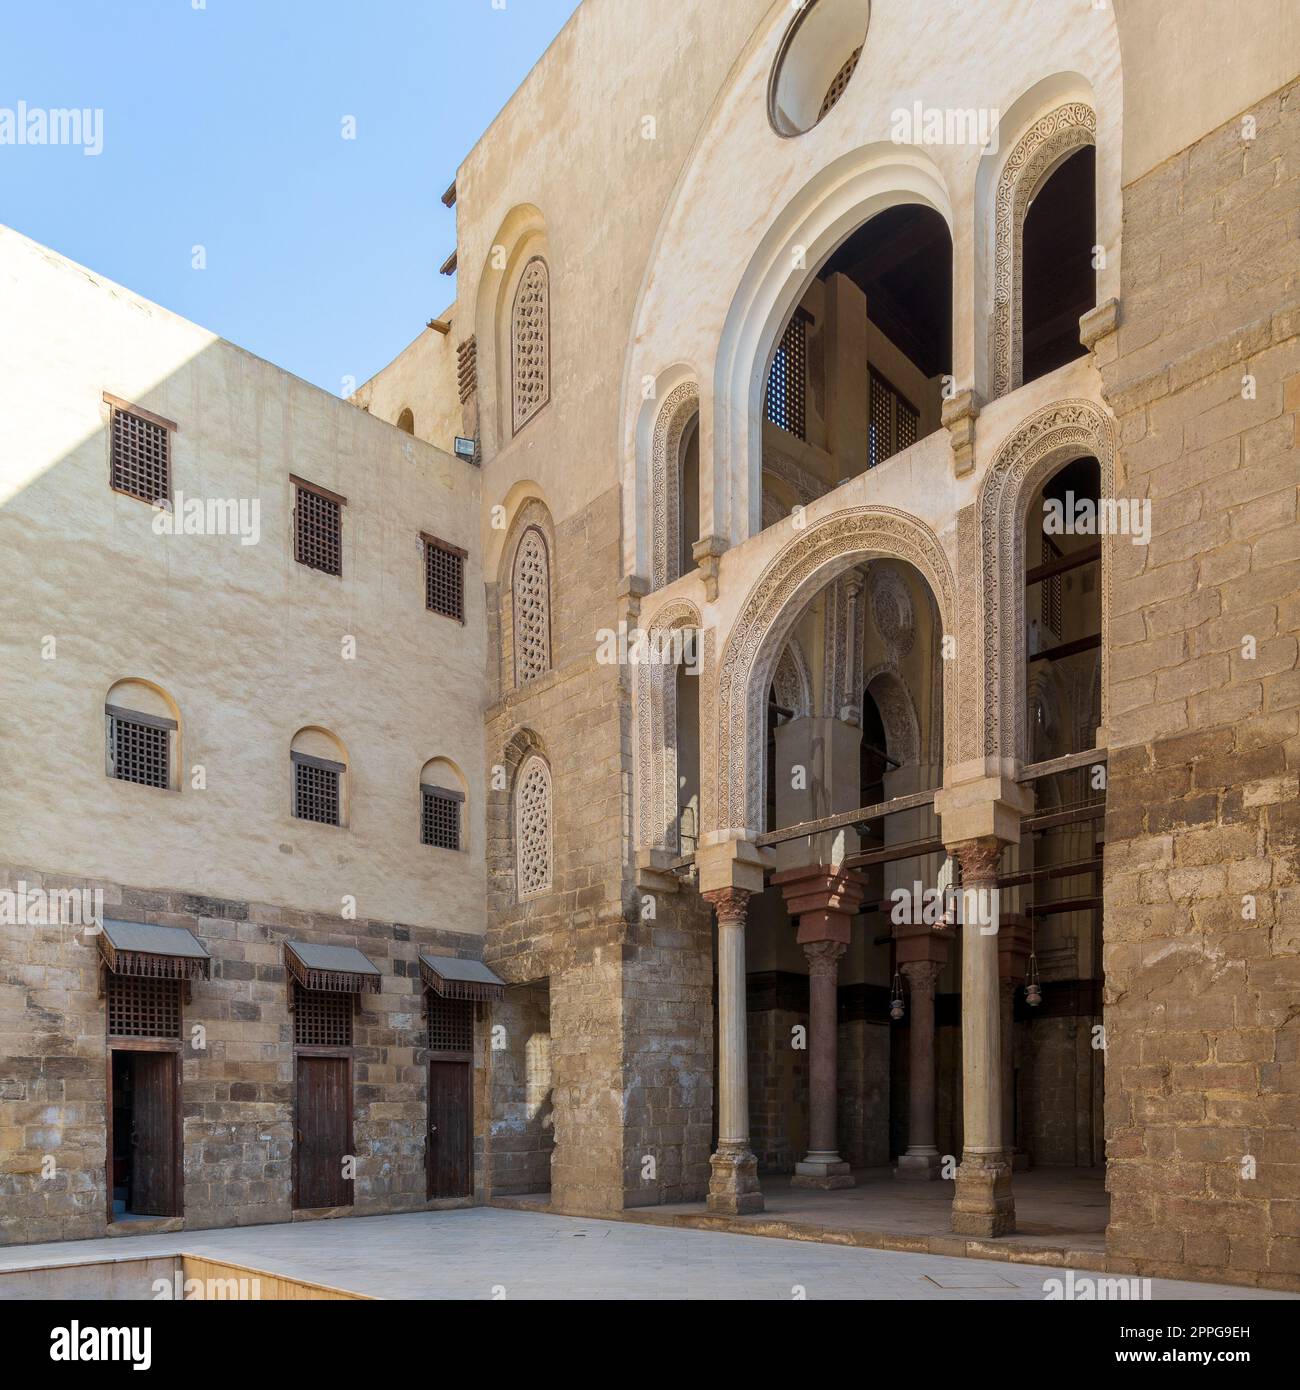 Courtyard of public historic mosque of Sultan Qalawun, Moez Street, Medieval Cairo, Egypt Stock Photo